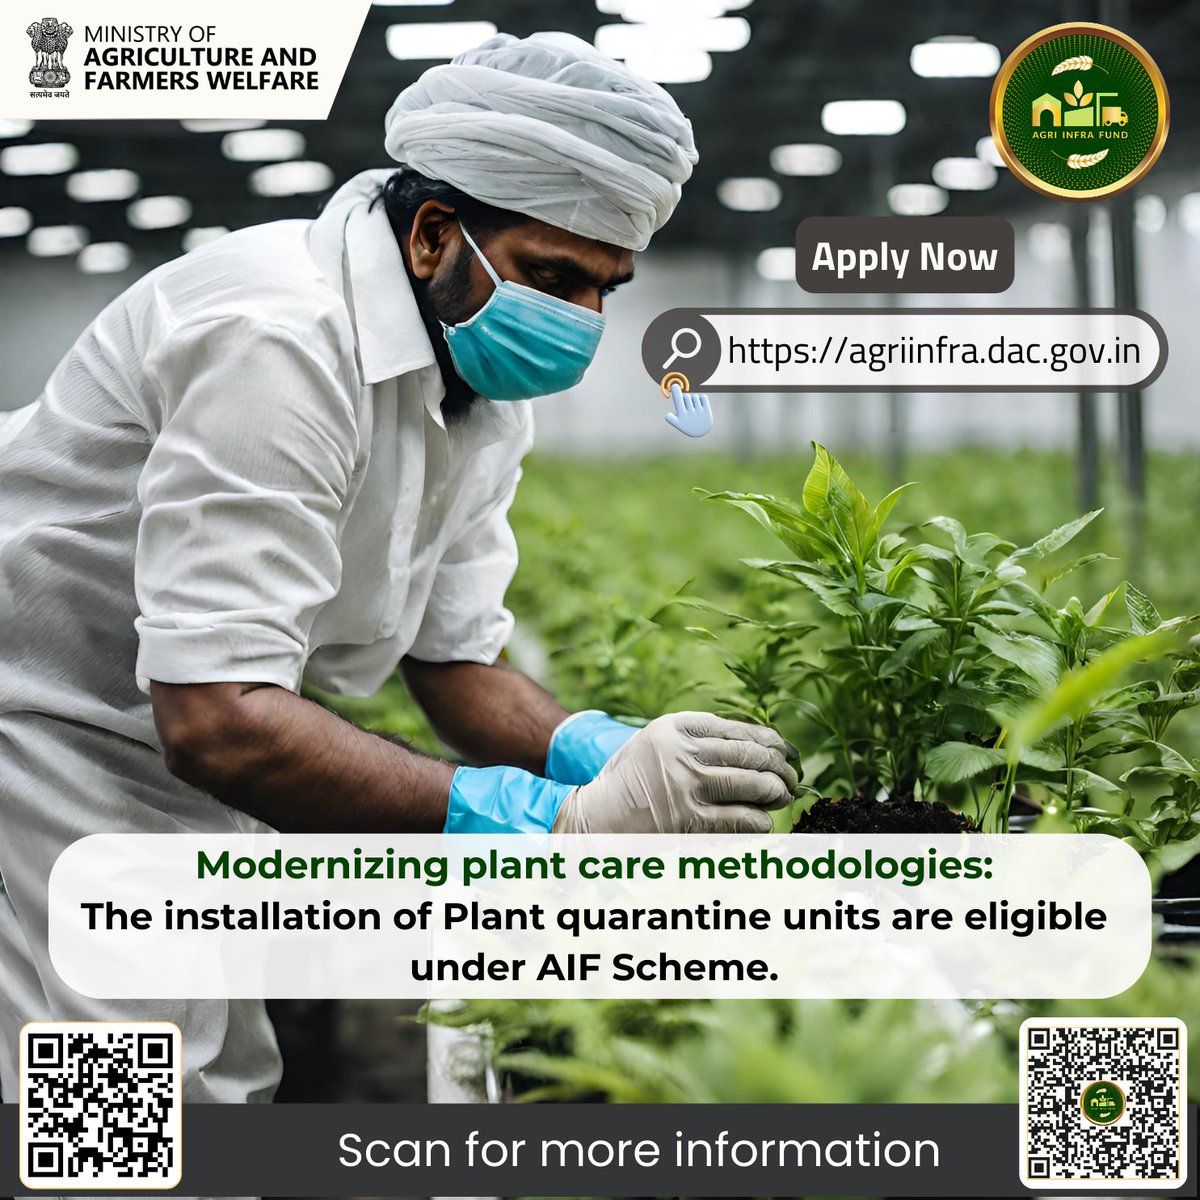 Unlock the potential of Plant Quarantine units with @AgriInfraFund. Apply now to take benefits. Log in to agriinfra.dac.gov.in #agriinfrafund #agrigoi #plantquarantineunits #plantquarantine #plantcare #postharvest #indianagriculture #mygovindia #trendingnow @agrigoi